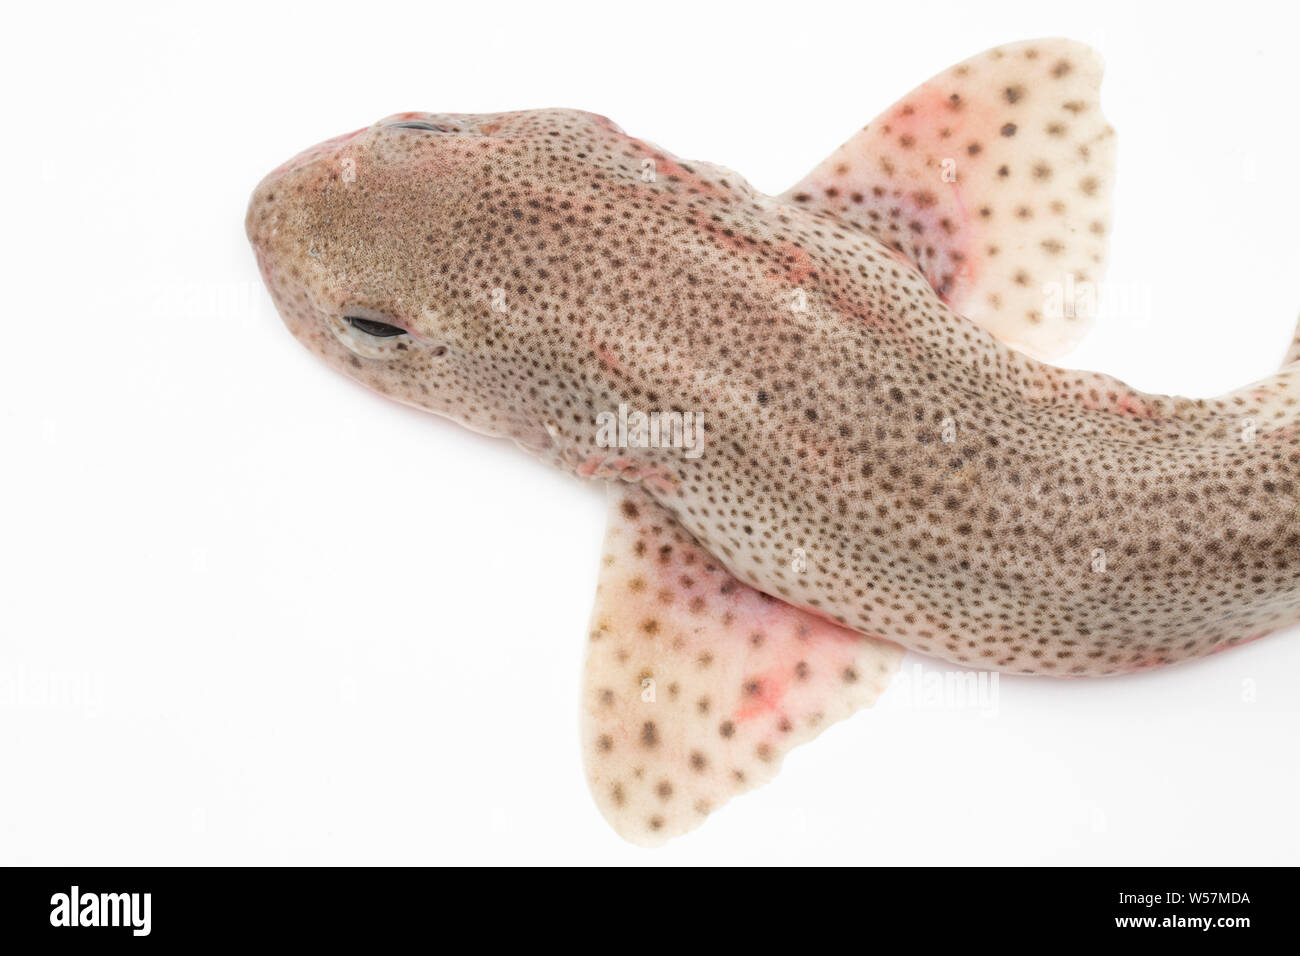 A lesser spotted dogfish, Scyliorhinus canicula, that was caught on rod and line from a boat in the English Channel. The lesser spotted dogfish is one Stock Photo